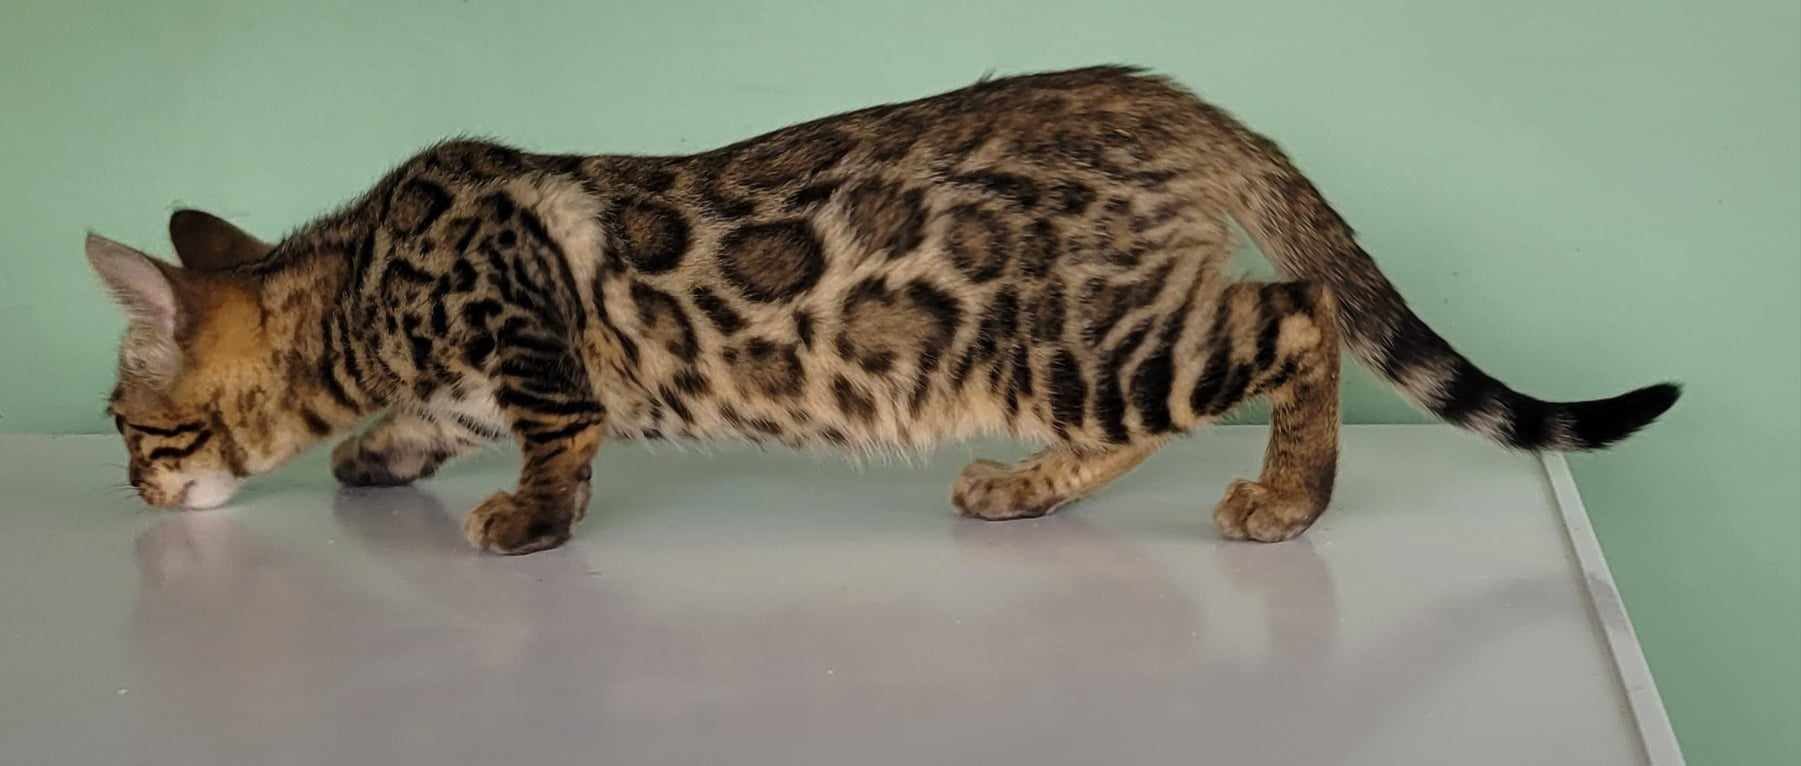 Photo 2 of Make my Day-SOLD the Bengal kitten.